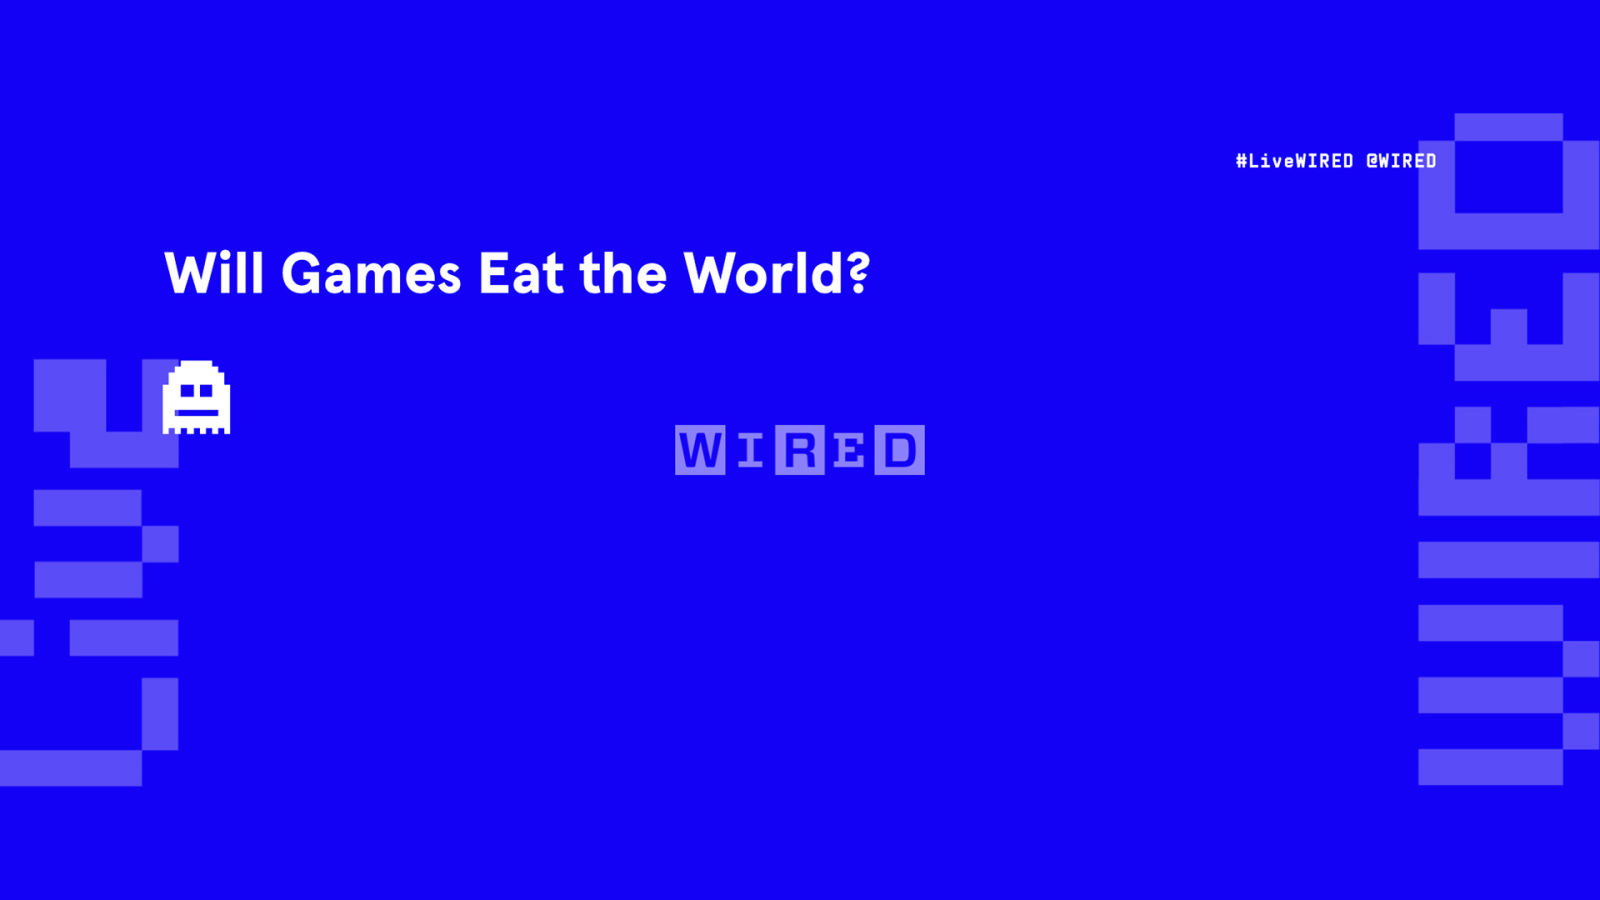 Will Games Eat the World?